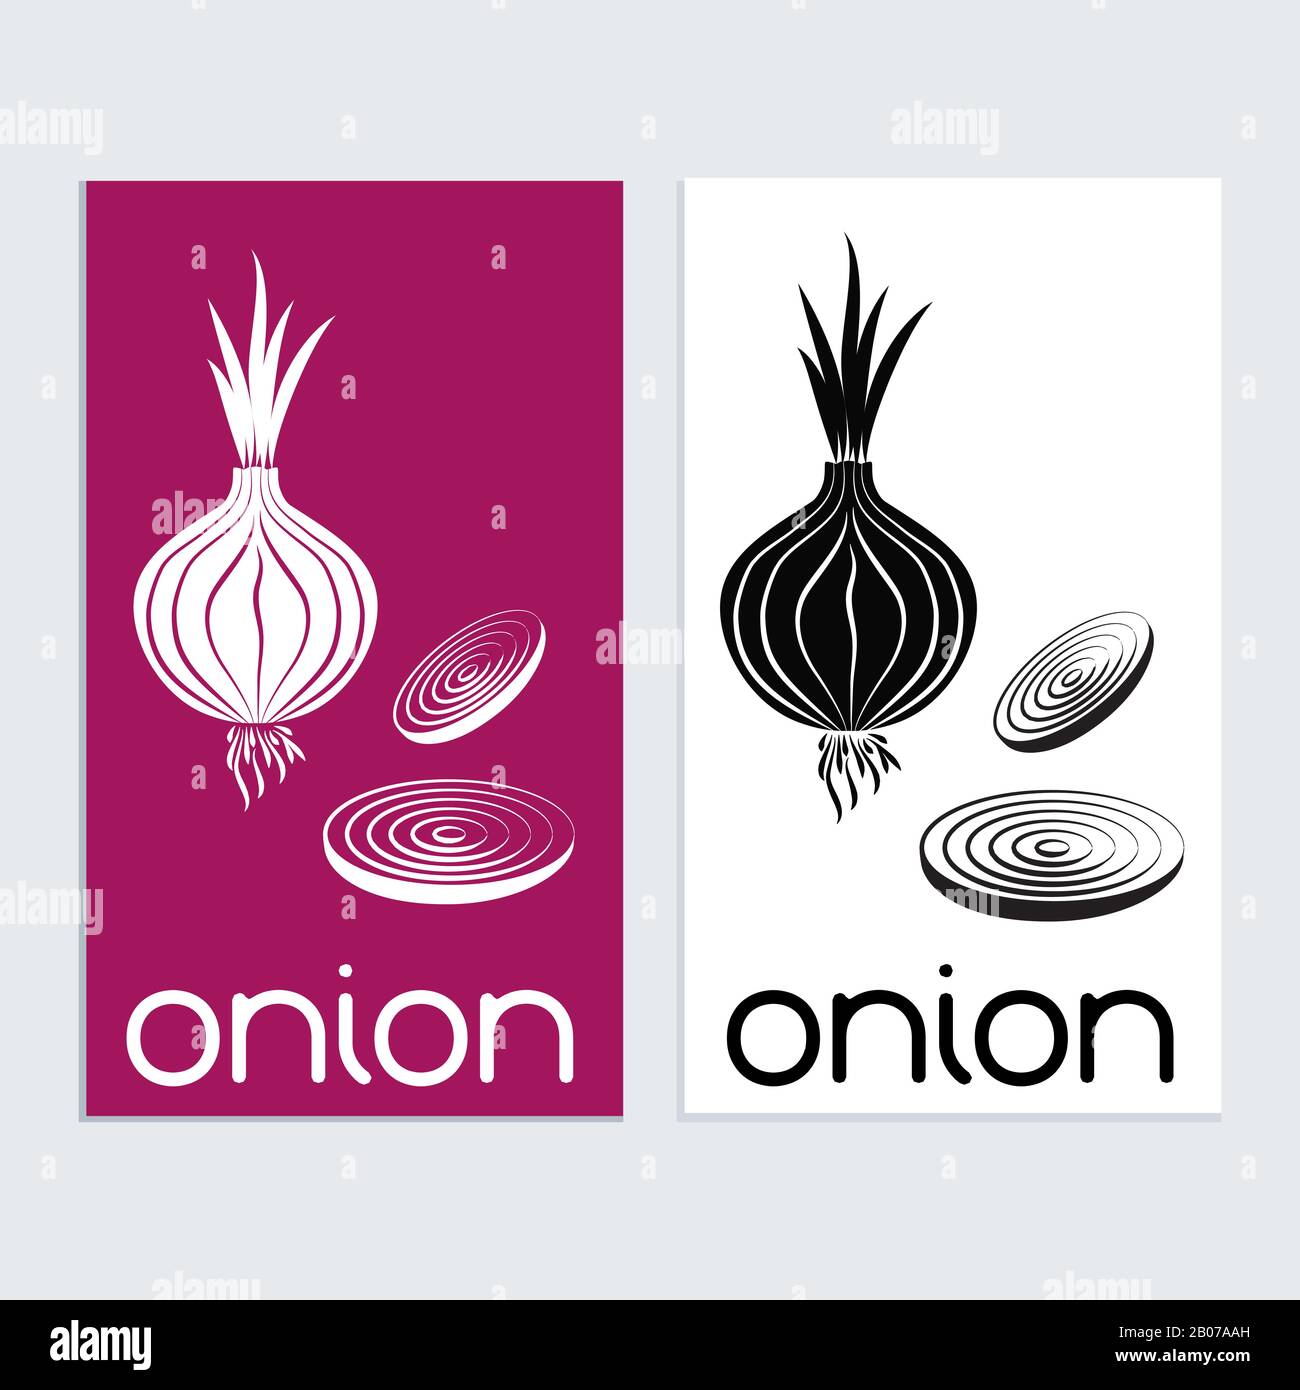 Onion logo icon sign tamplat. Red onion silouhette Stock Vector